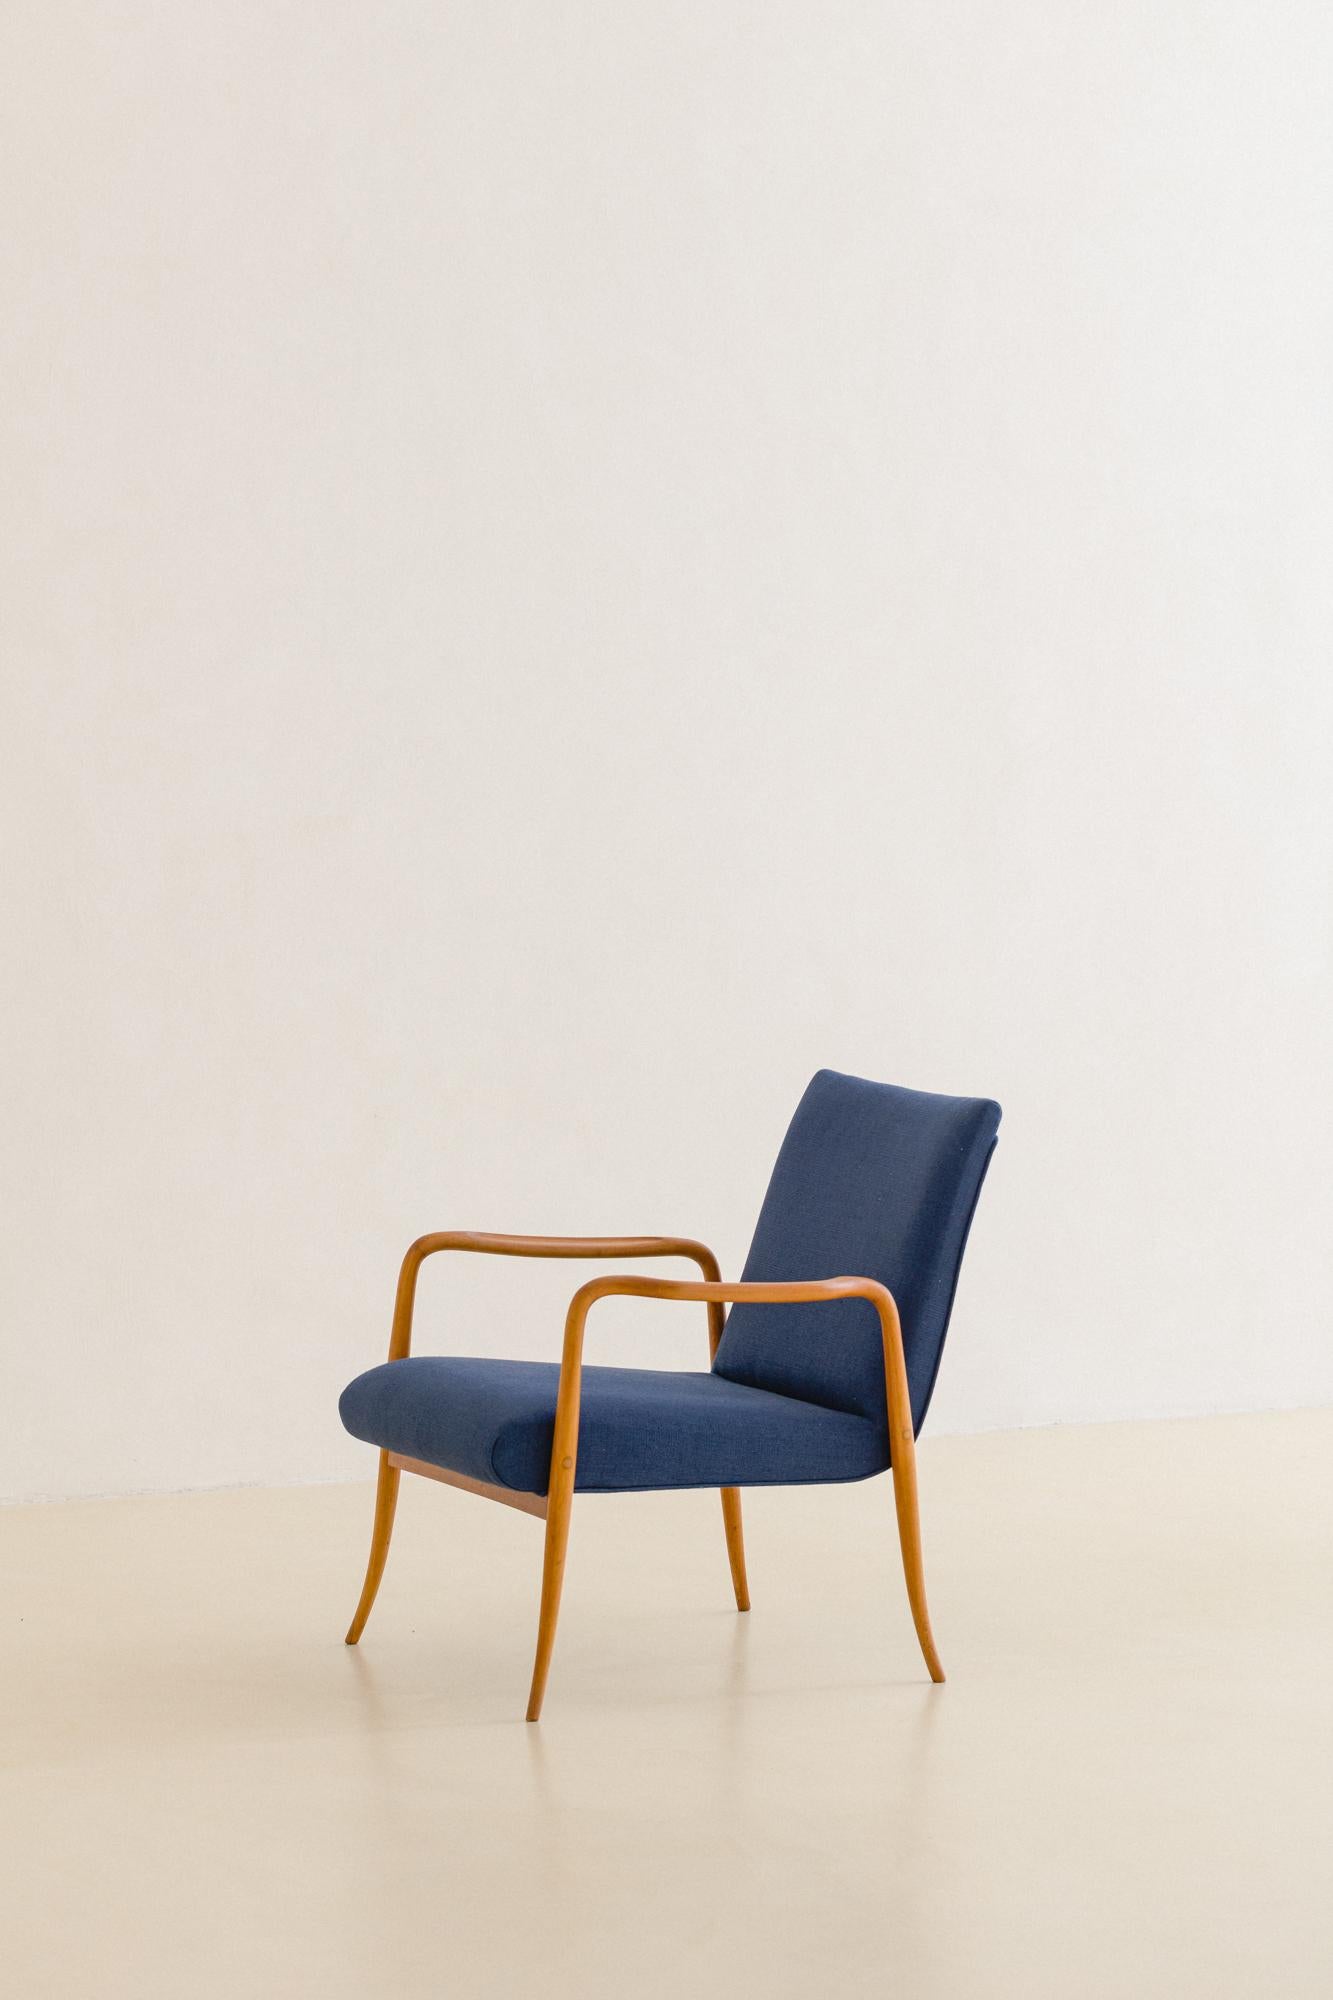 The Leve armchair is one of the fundamental pieces in Brazilian Modern design history. Designed by Joaquim Tenreiro (1906-1992) in 1942, it is considered by its author his first and most significant creation.

Leve means 